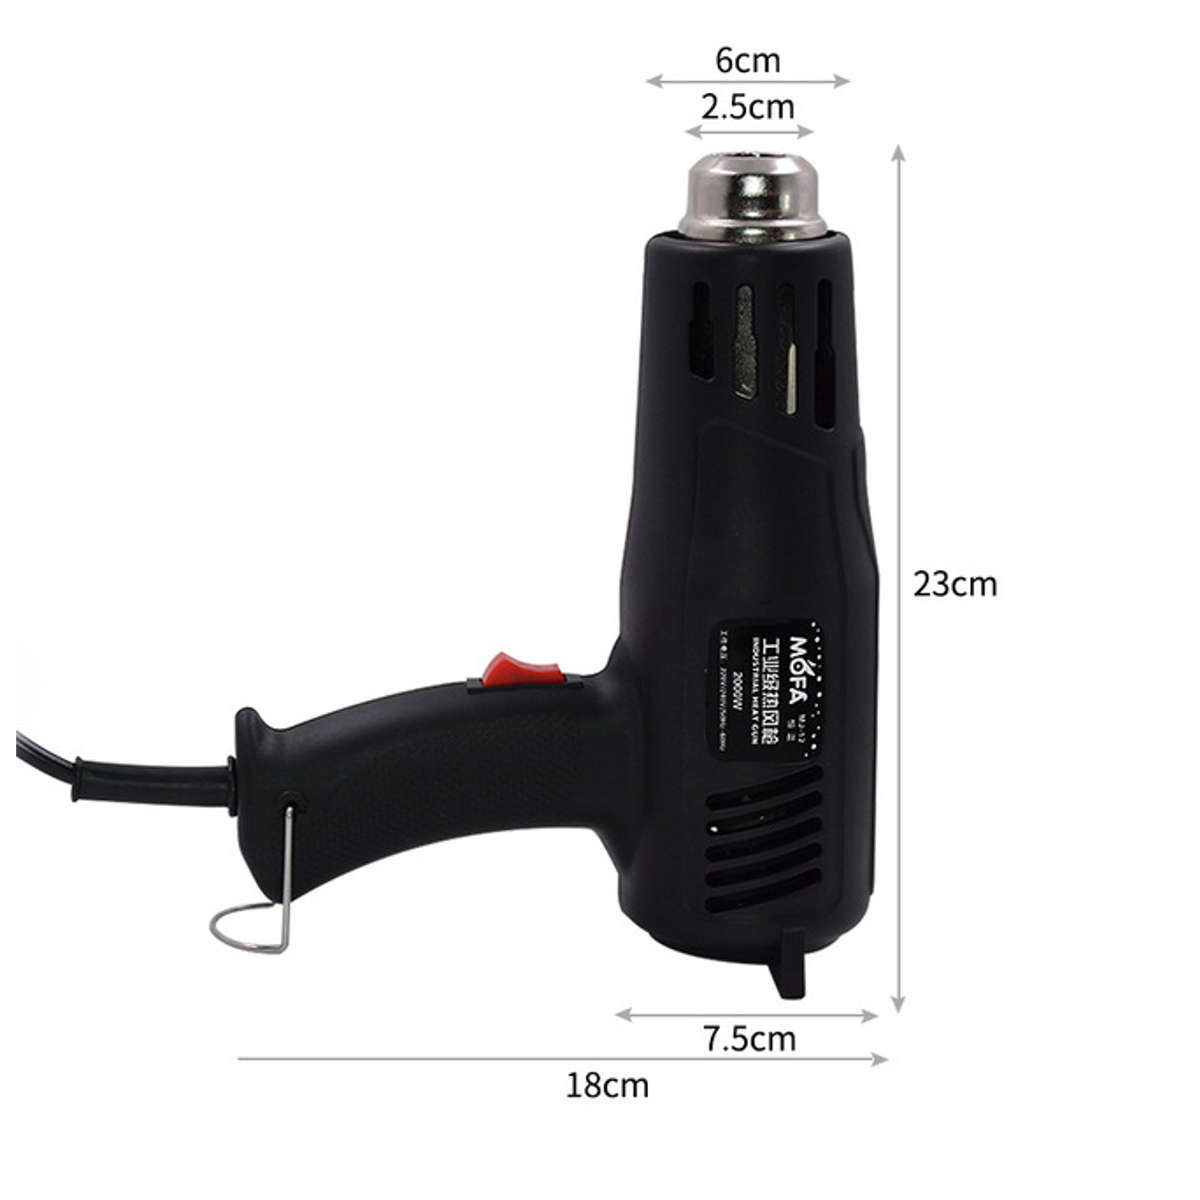 2000W-220V-Industrial-Electric-Hot-Air-Guns-Adjustable-Thermoregulator-Air-Flow-Heat-Welding-Torch-f-1688931-11